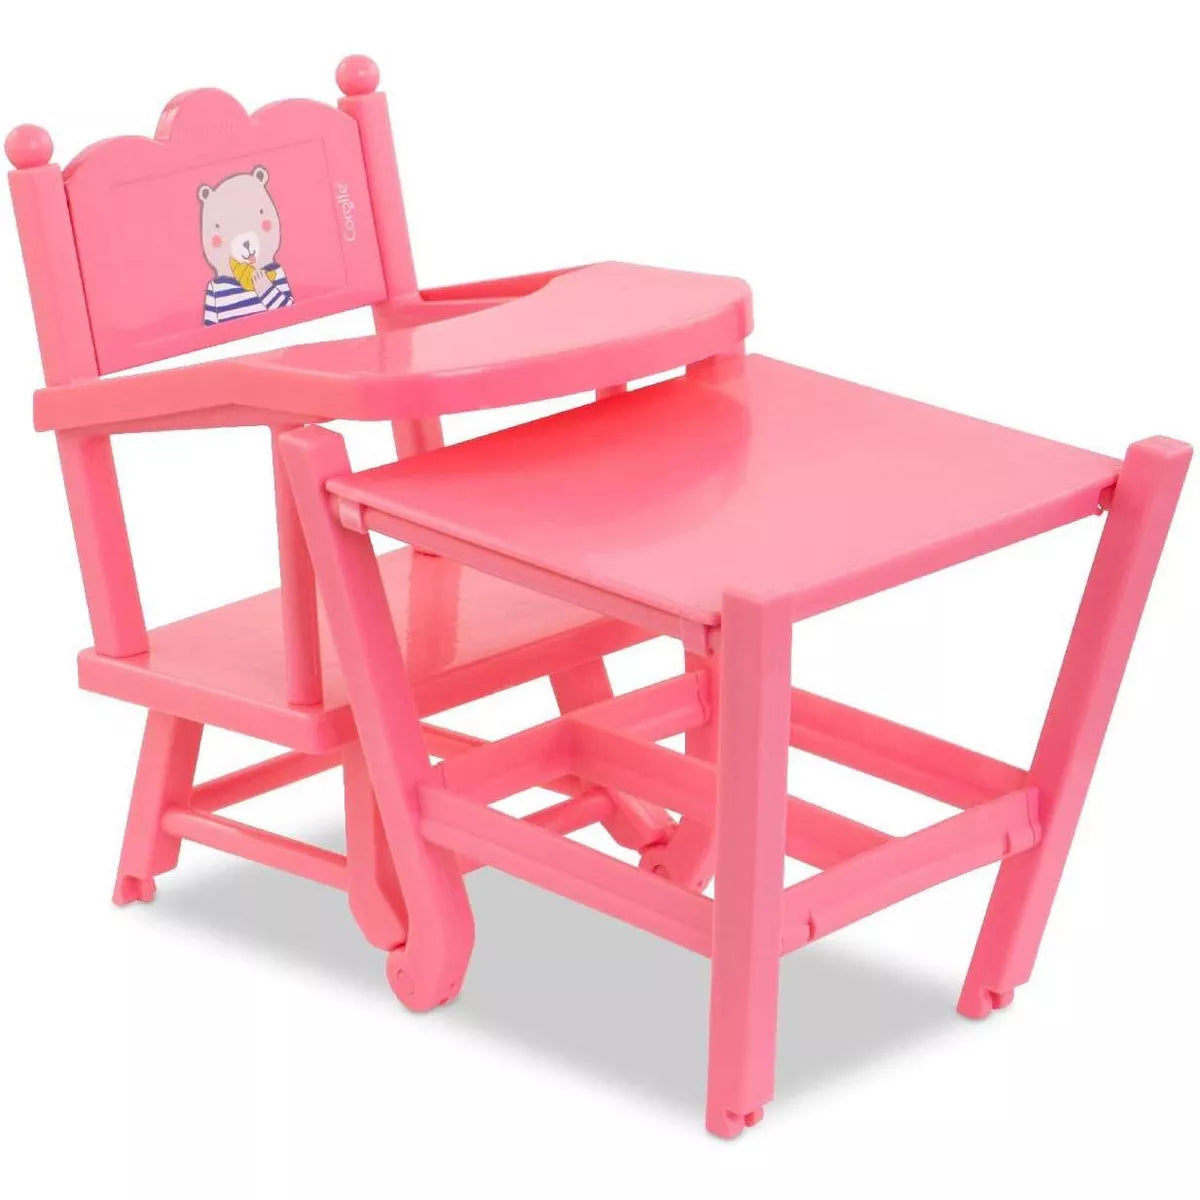 Corolle Baby Doll High Chair for 14"/17" Baby Dolls-COROLLE-Little Giant Kidz